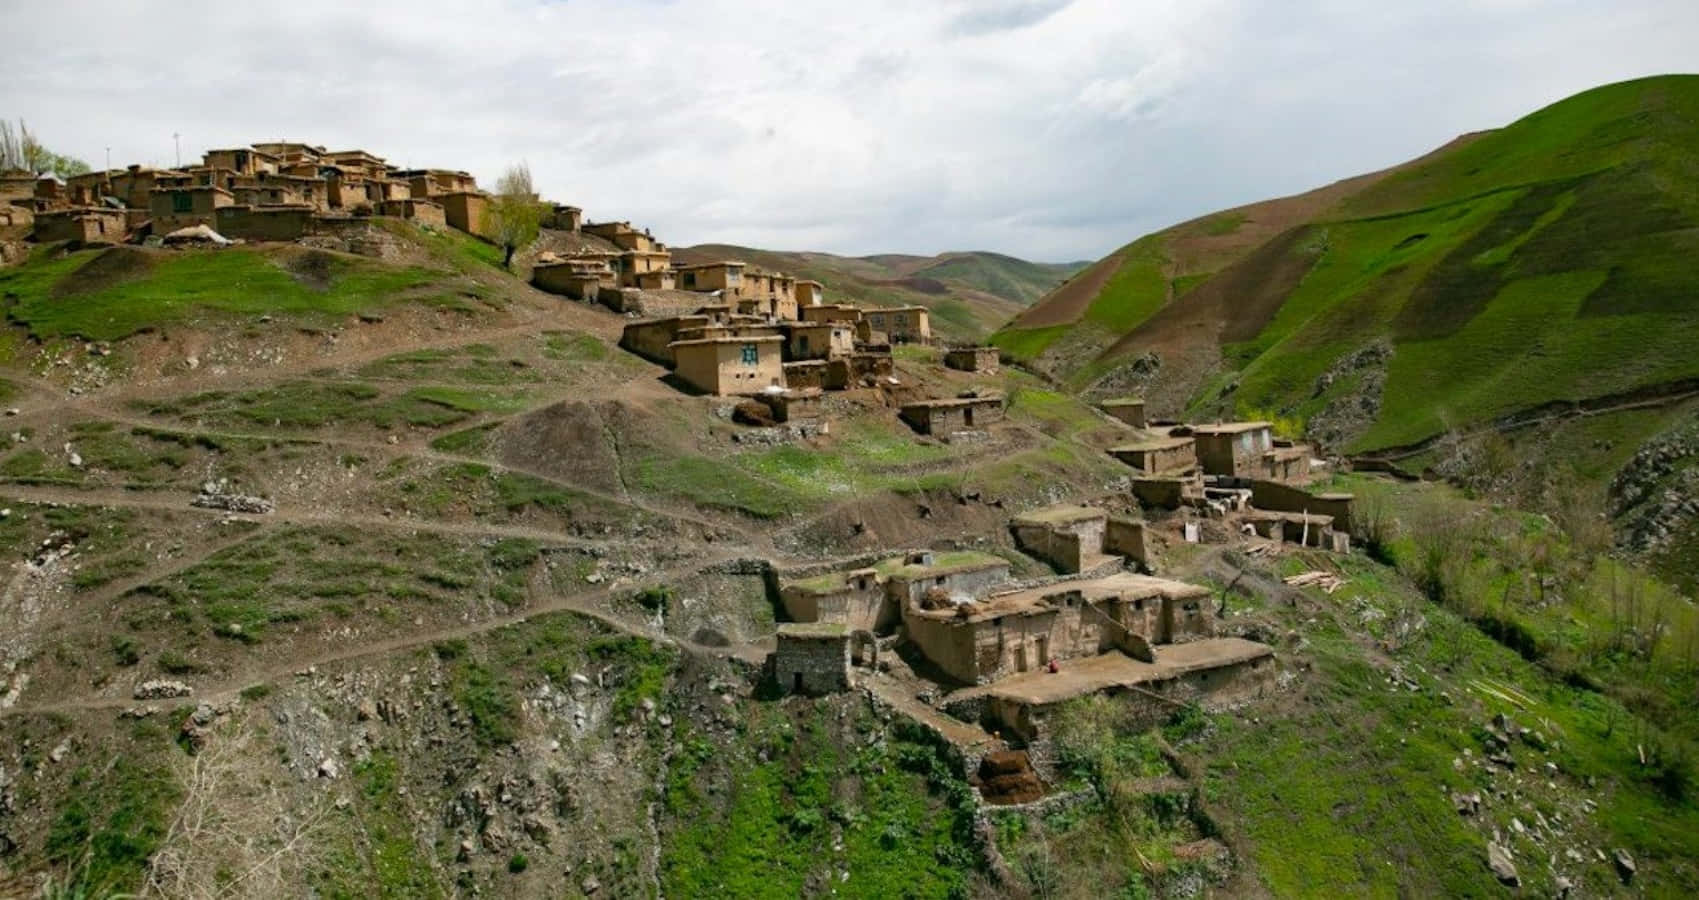 A Village Is Sitting On Top Of A Mountain